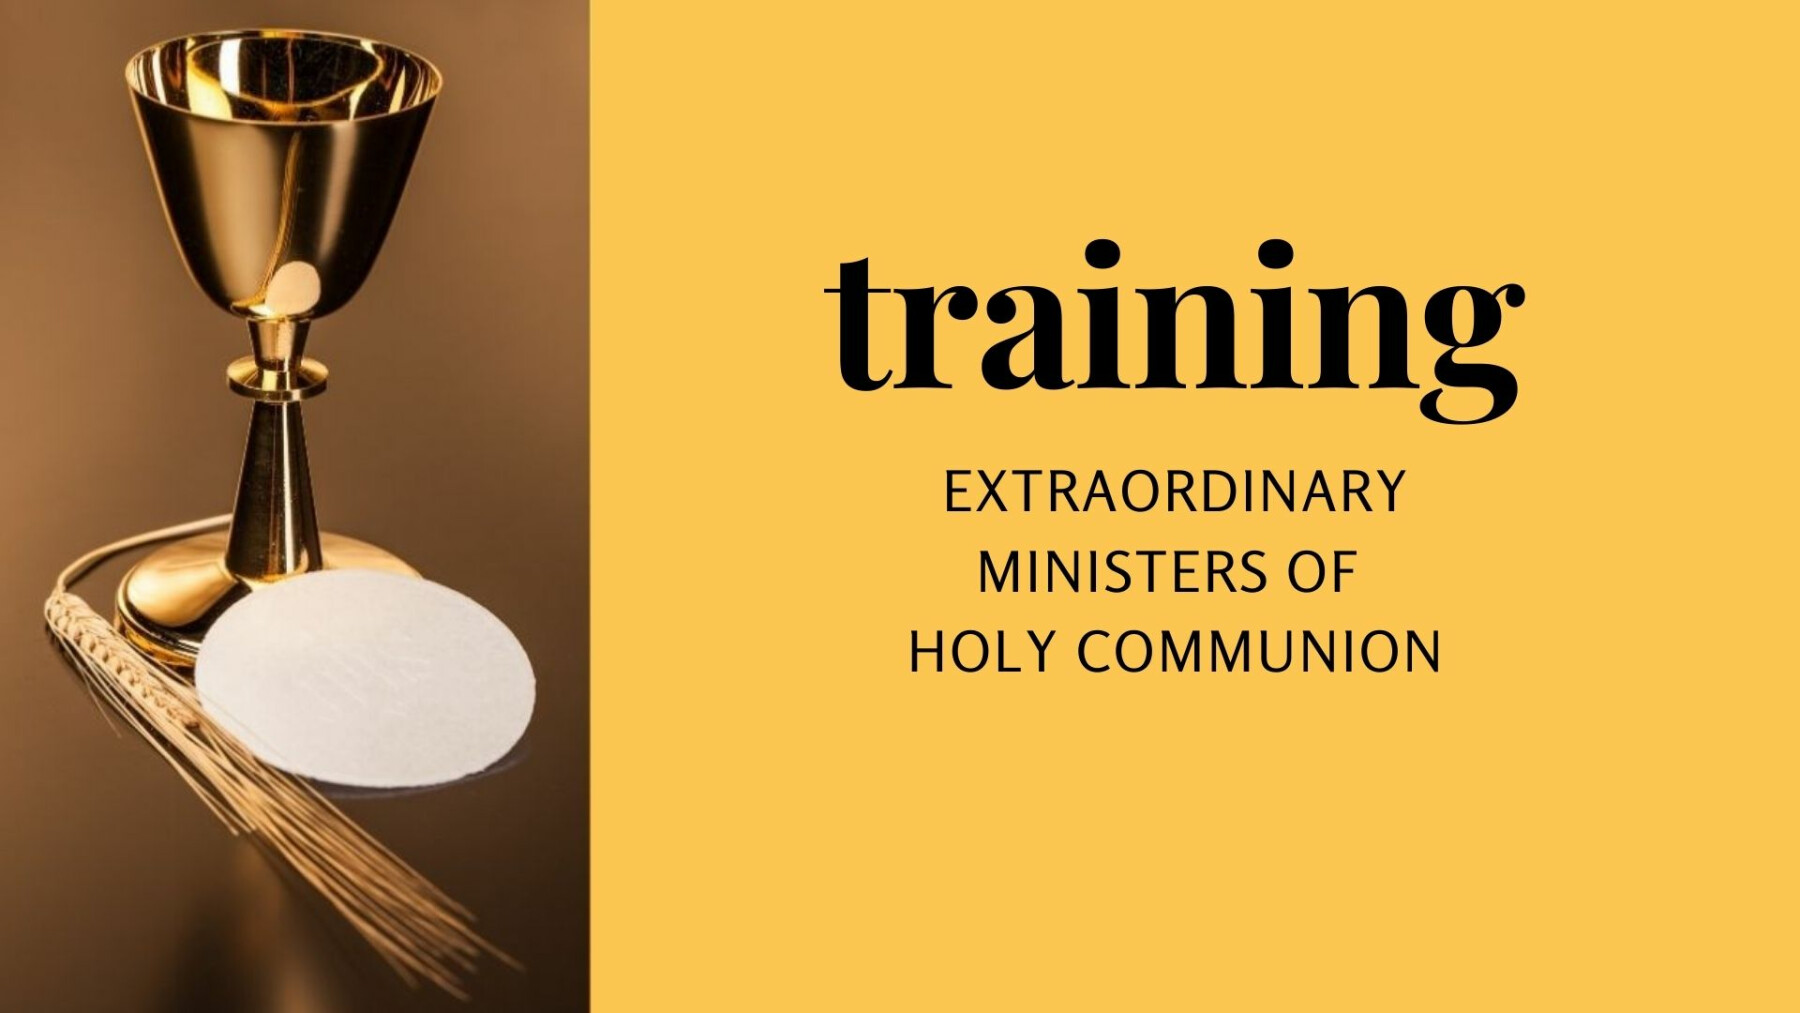 Extraordinary Ministers of Holy Communion Training